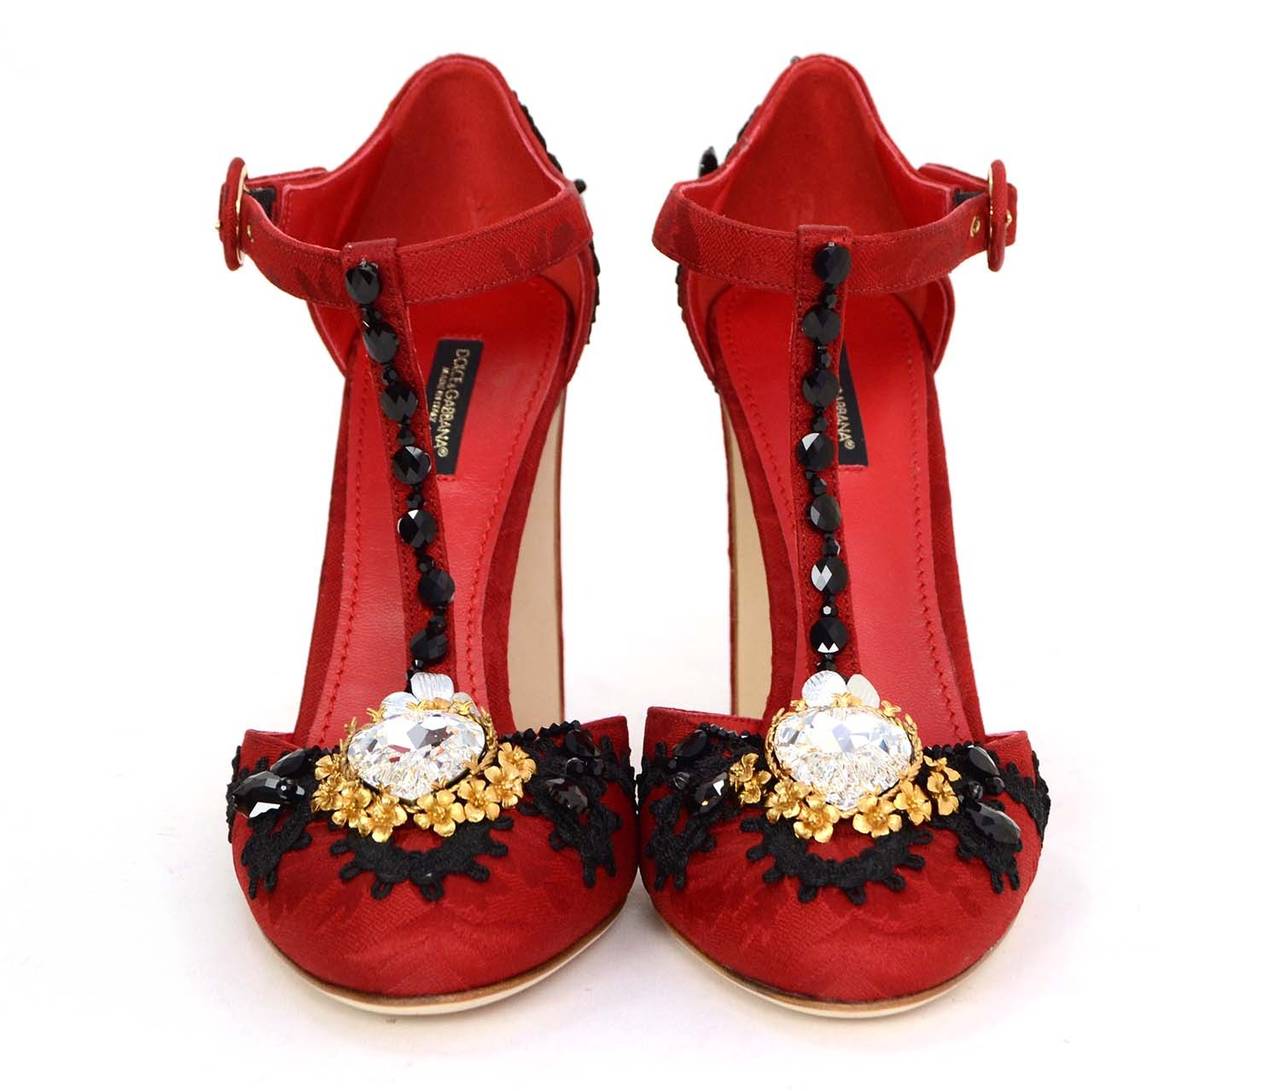 Dolce & Gabbana Red & Black Vally Jewel-Embellished T-Strap Pumps
Features large heart-shaped rhinestone at toe
Made in: Italy
Color: Red, black gold and silvertone
Composition: Lace, silk, rhinestones and metal
Sole Stamp: Dolce & Gabbana 39